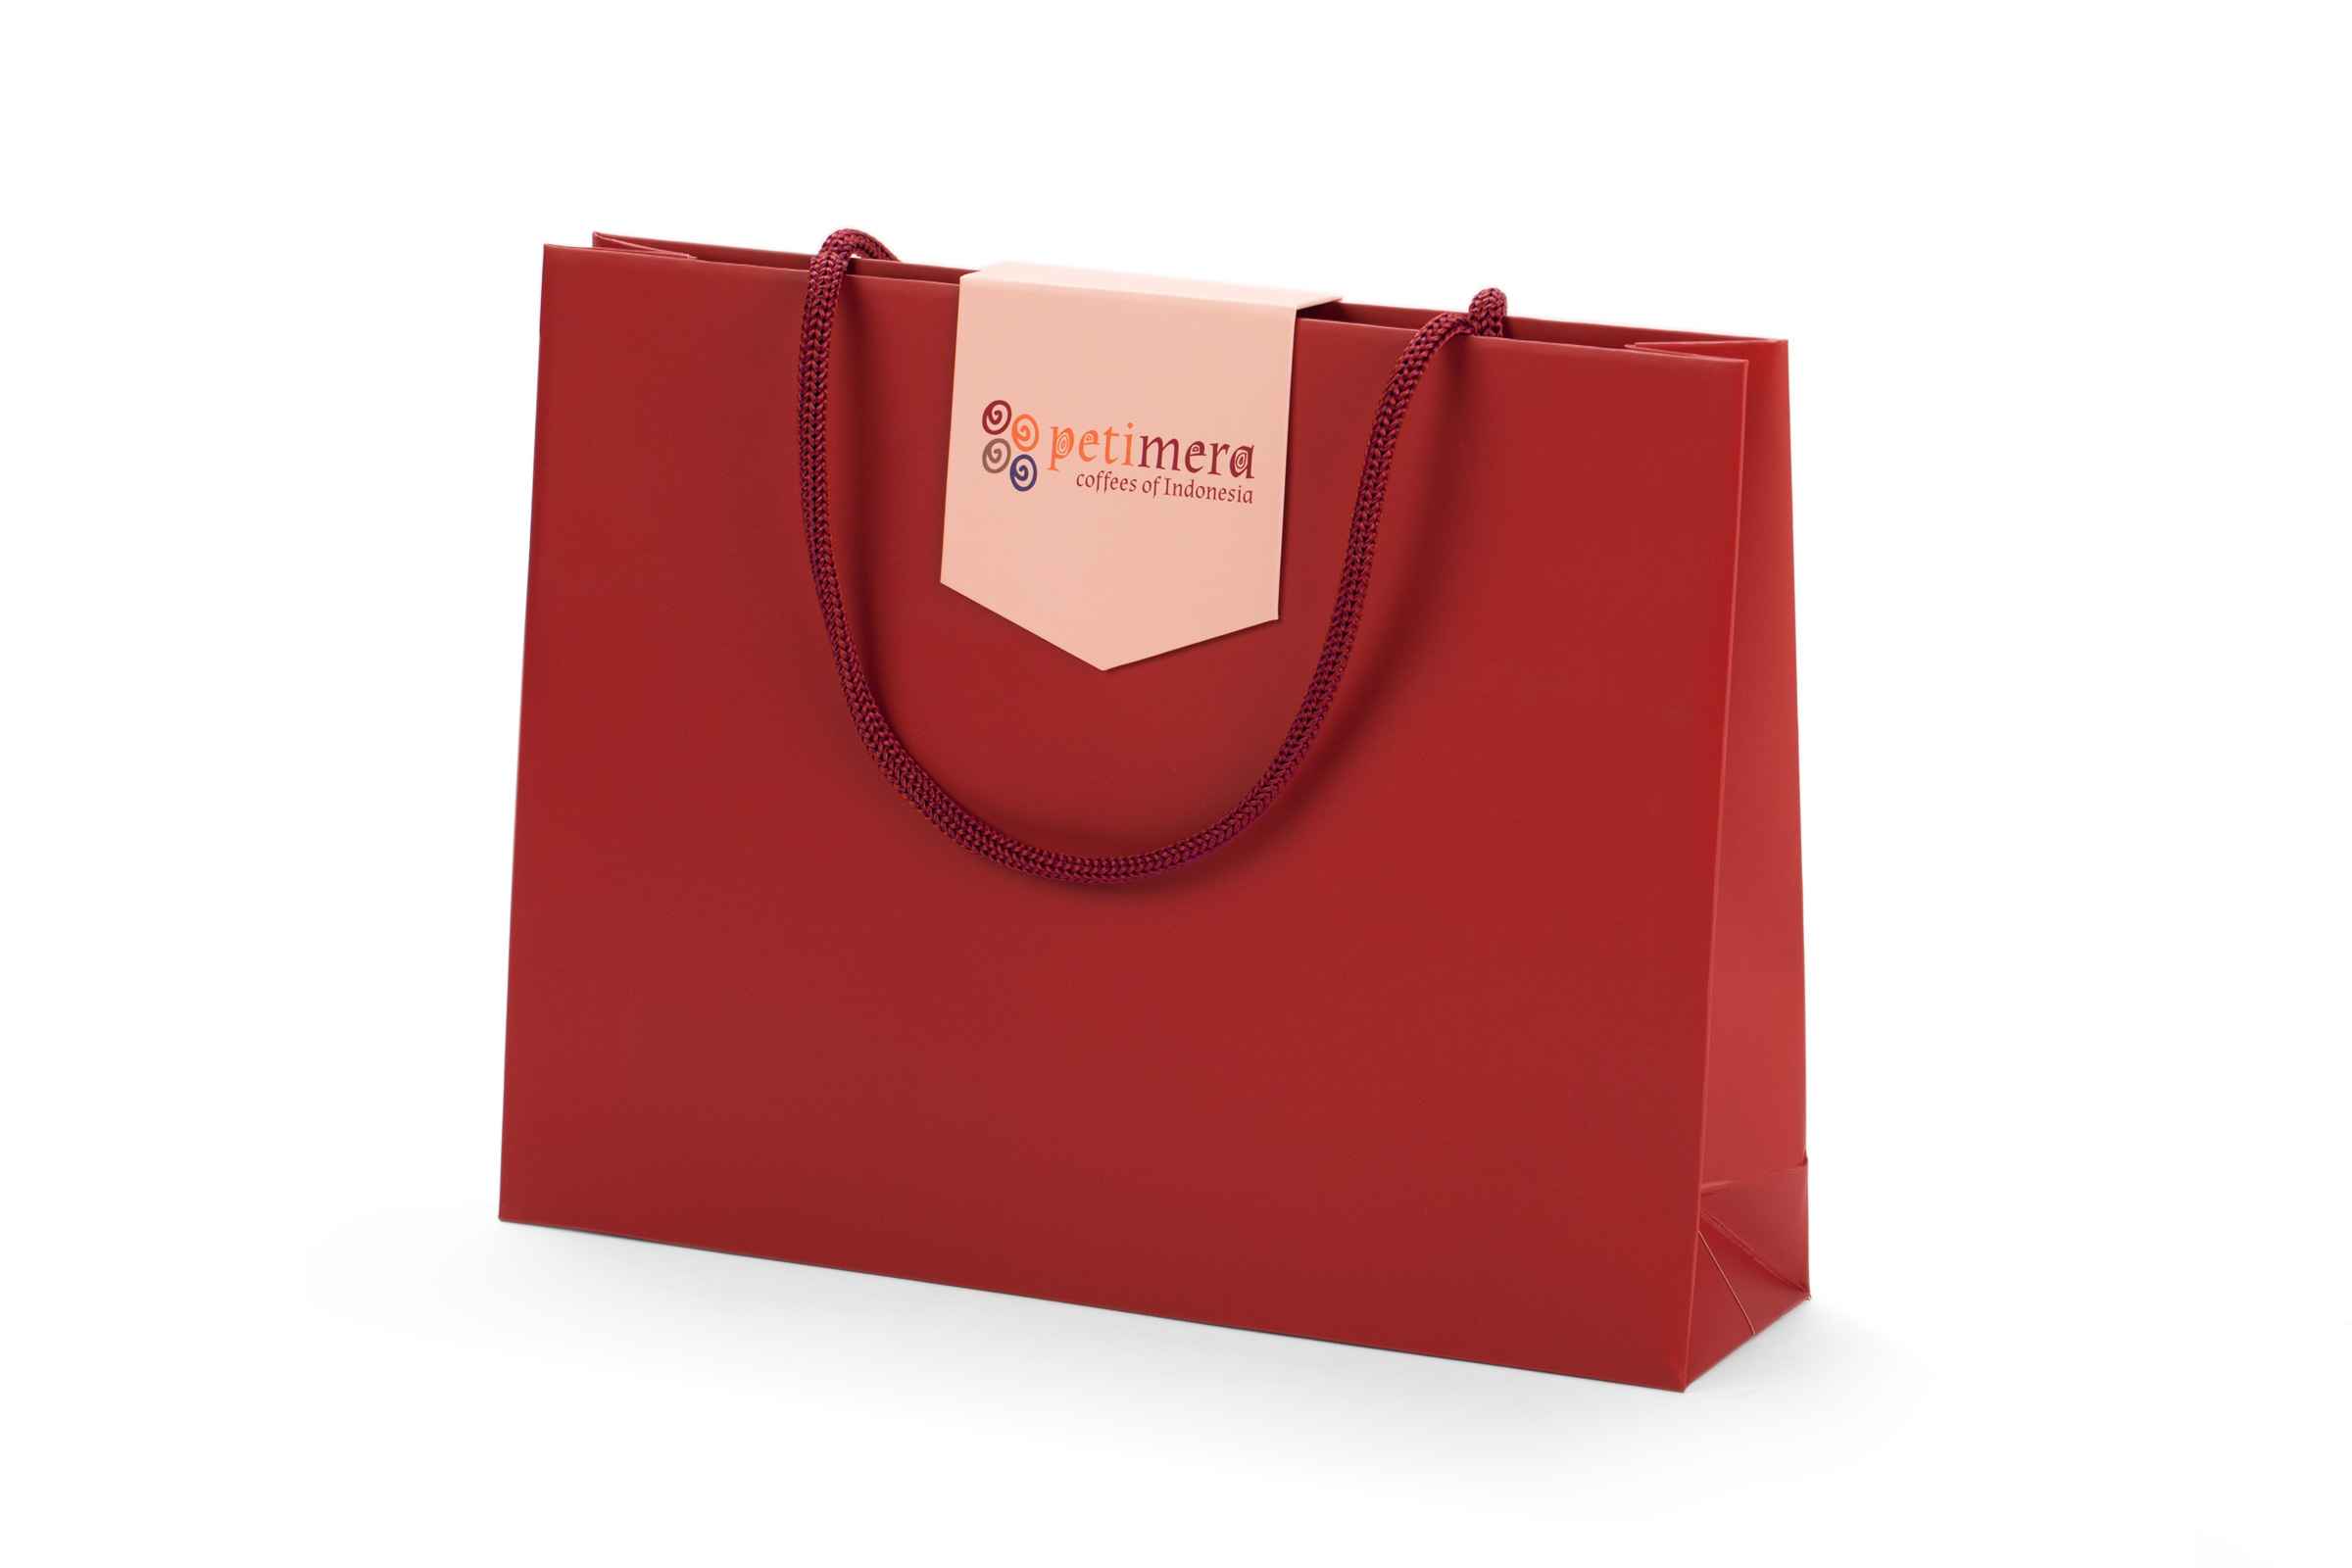 custom event paper bag design with inventive magnetic closure flap developed by nPack